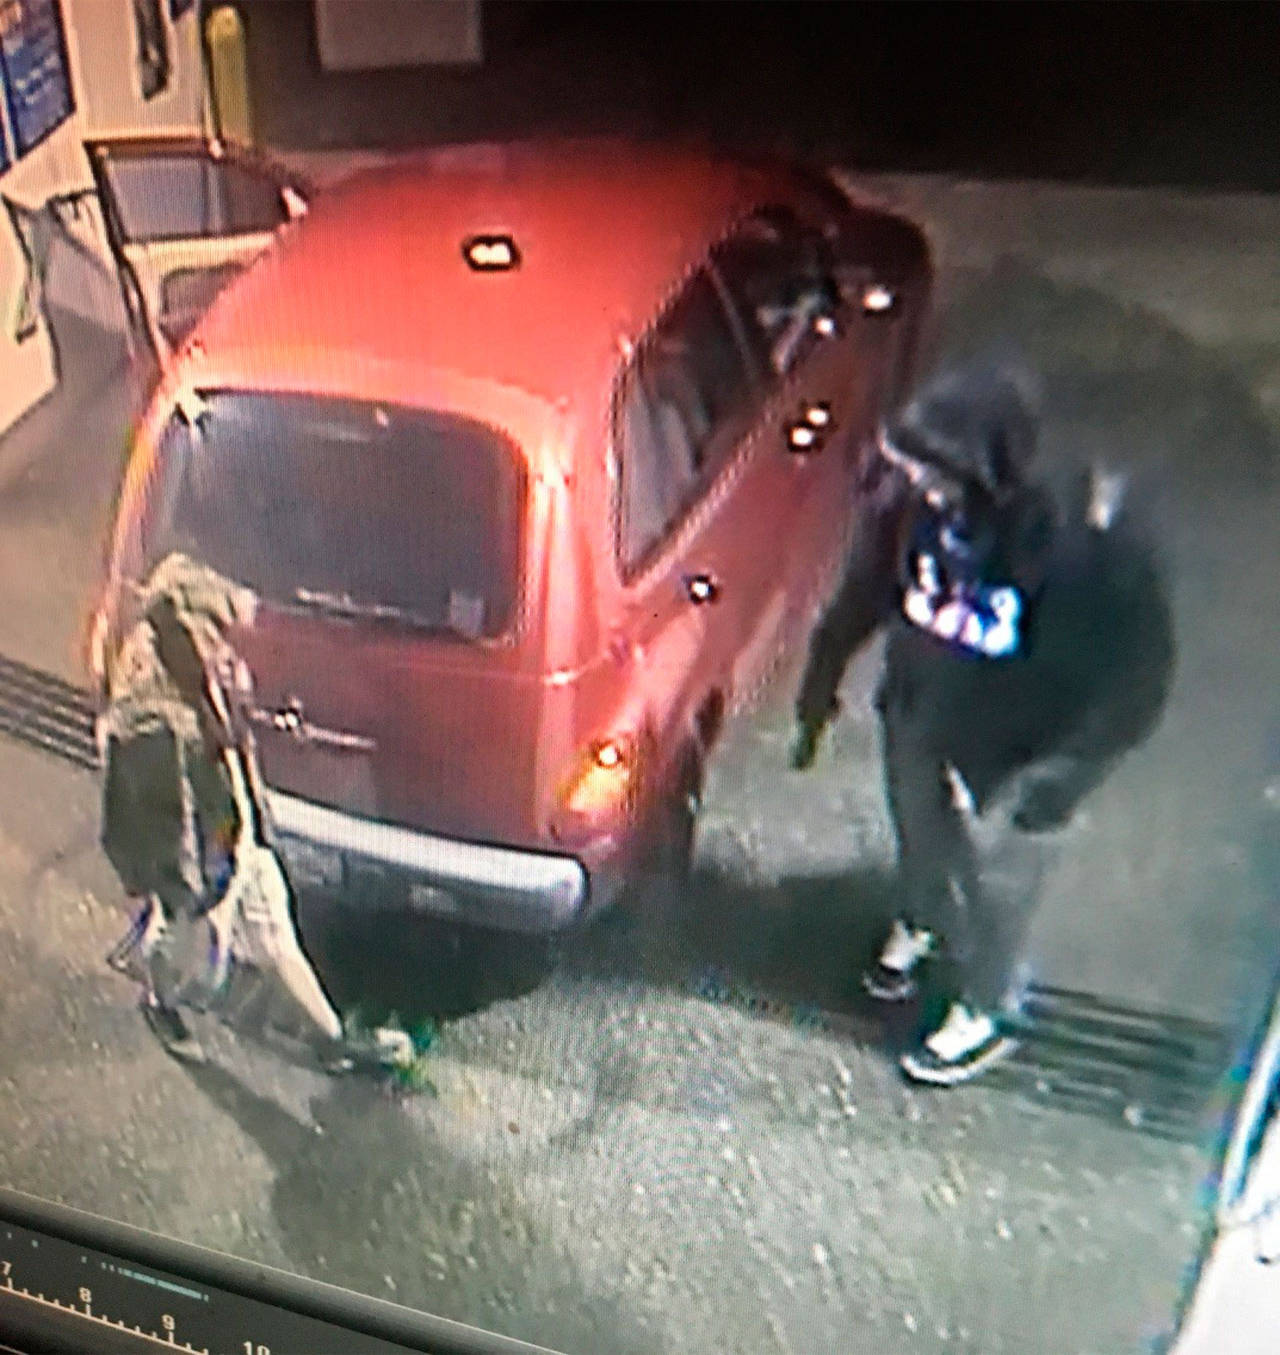 An image from surveillance video shows suspects involved in an Aug. 5 shooting at the Brown Bear Car Wash on 164th Street SW in Lynnwood. (Snohomish County Sheriff’s Office)